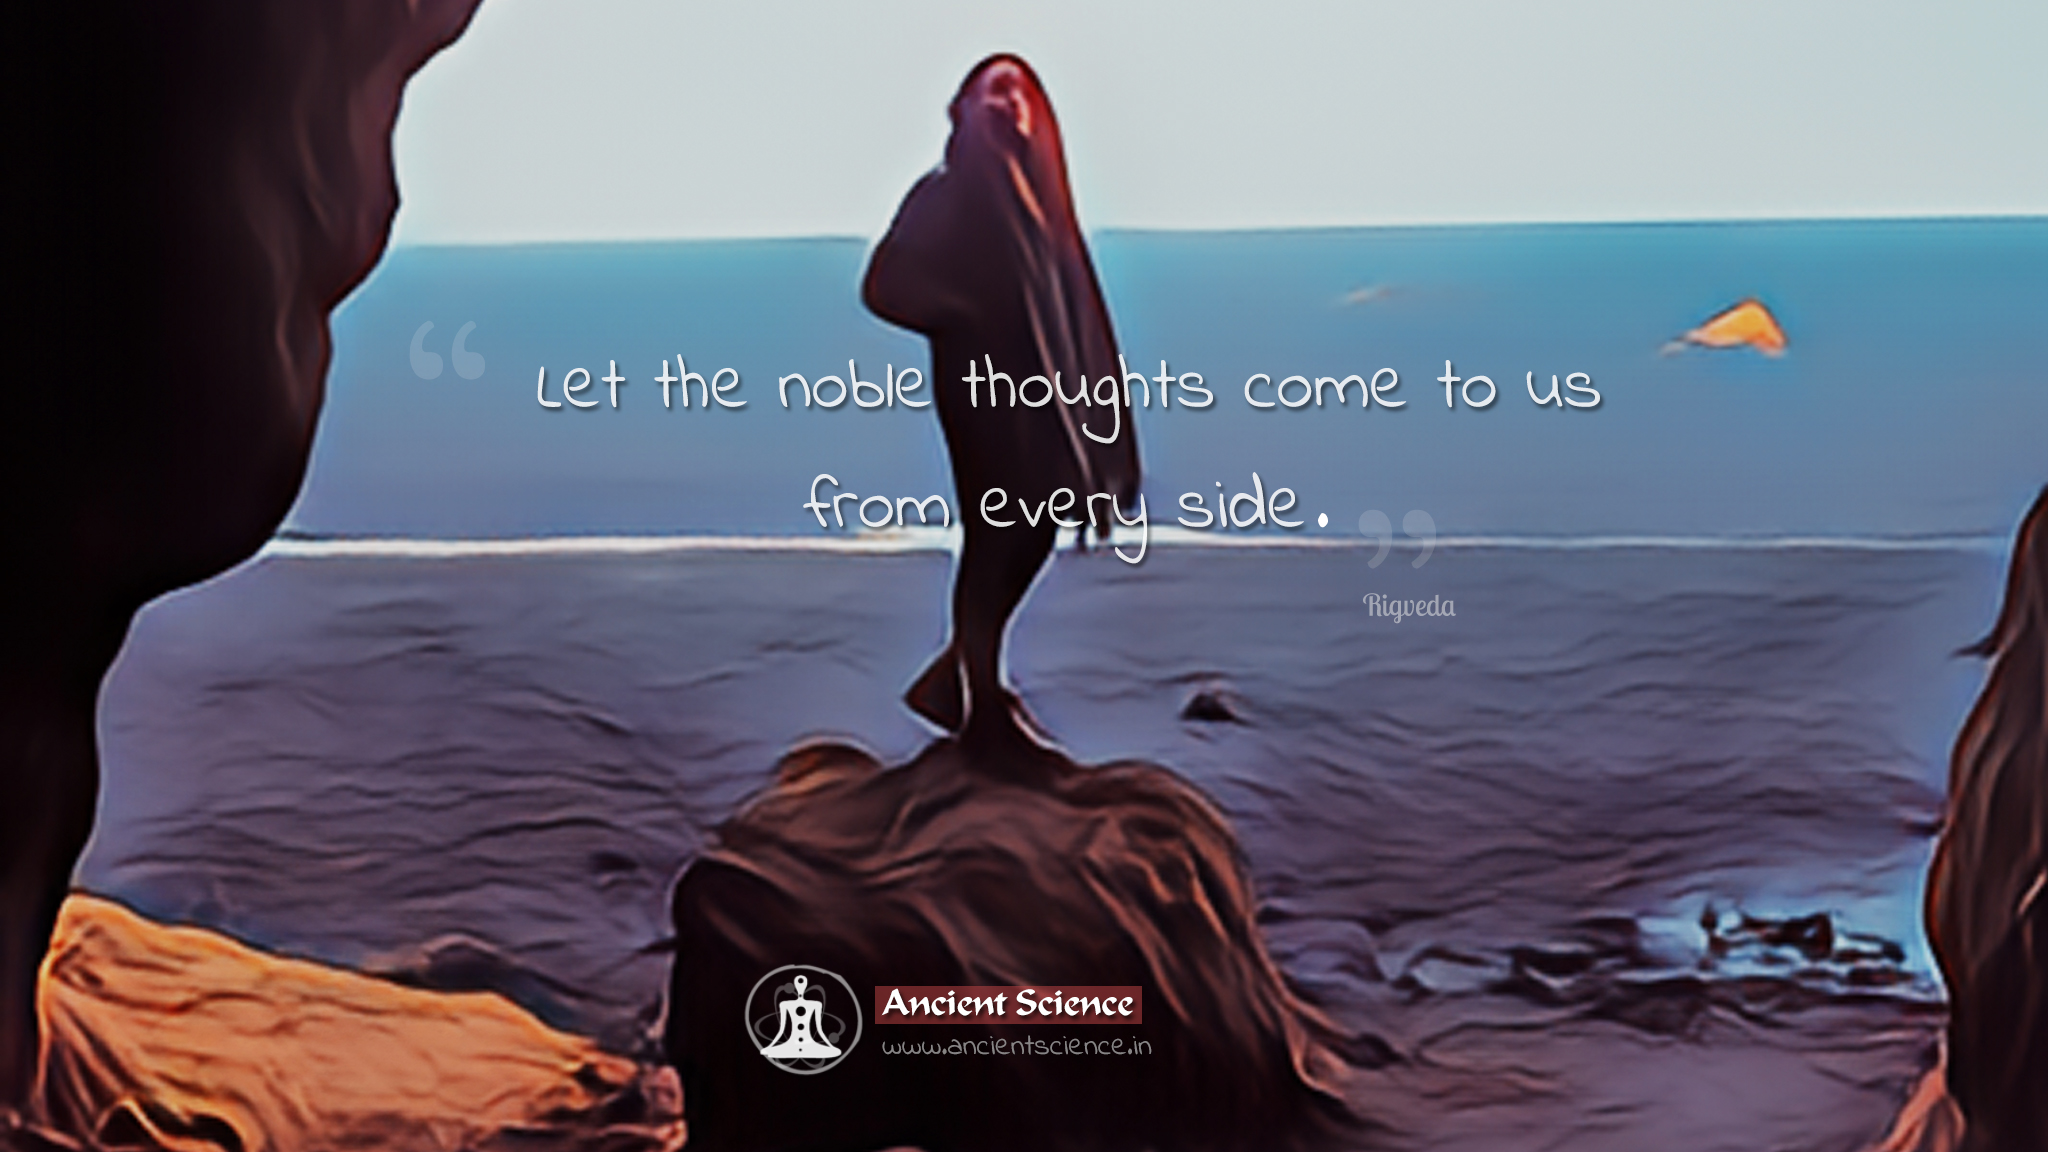 Let the noble thoughts come to us from every side.